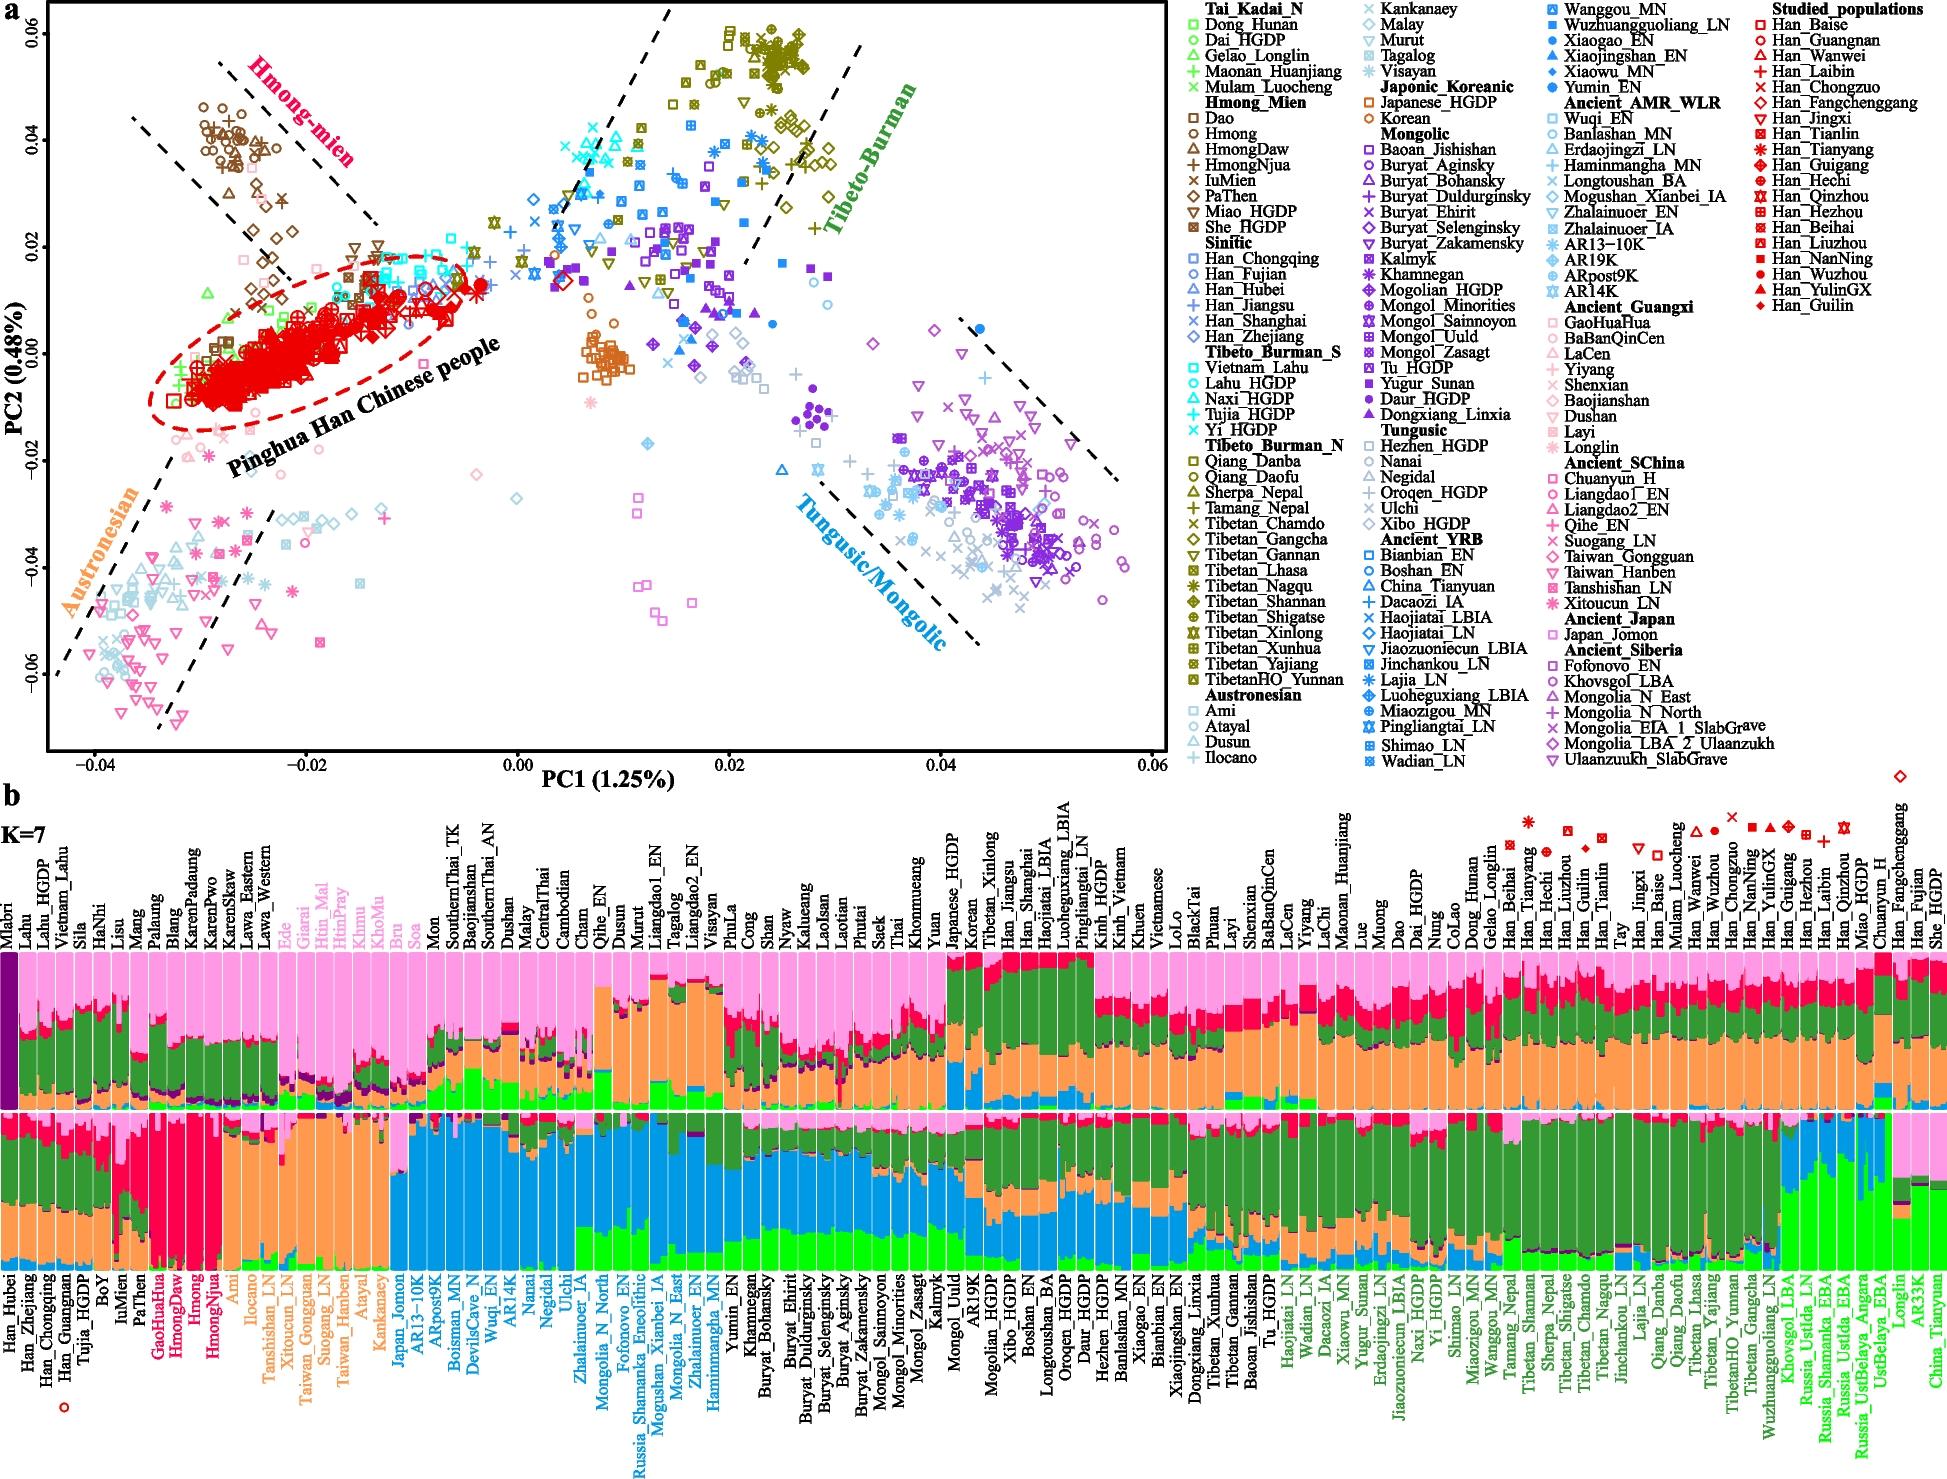 Differentiated adaptative genetic architecture and language-related demographical history in South China inferred from 619 genomes from 56 populations